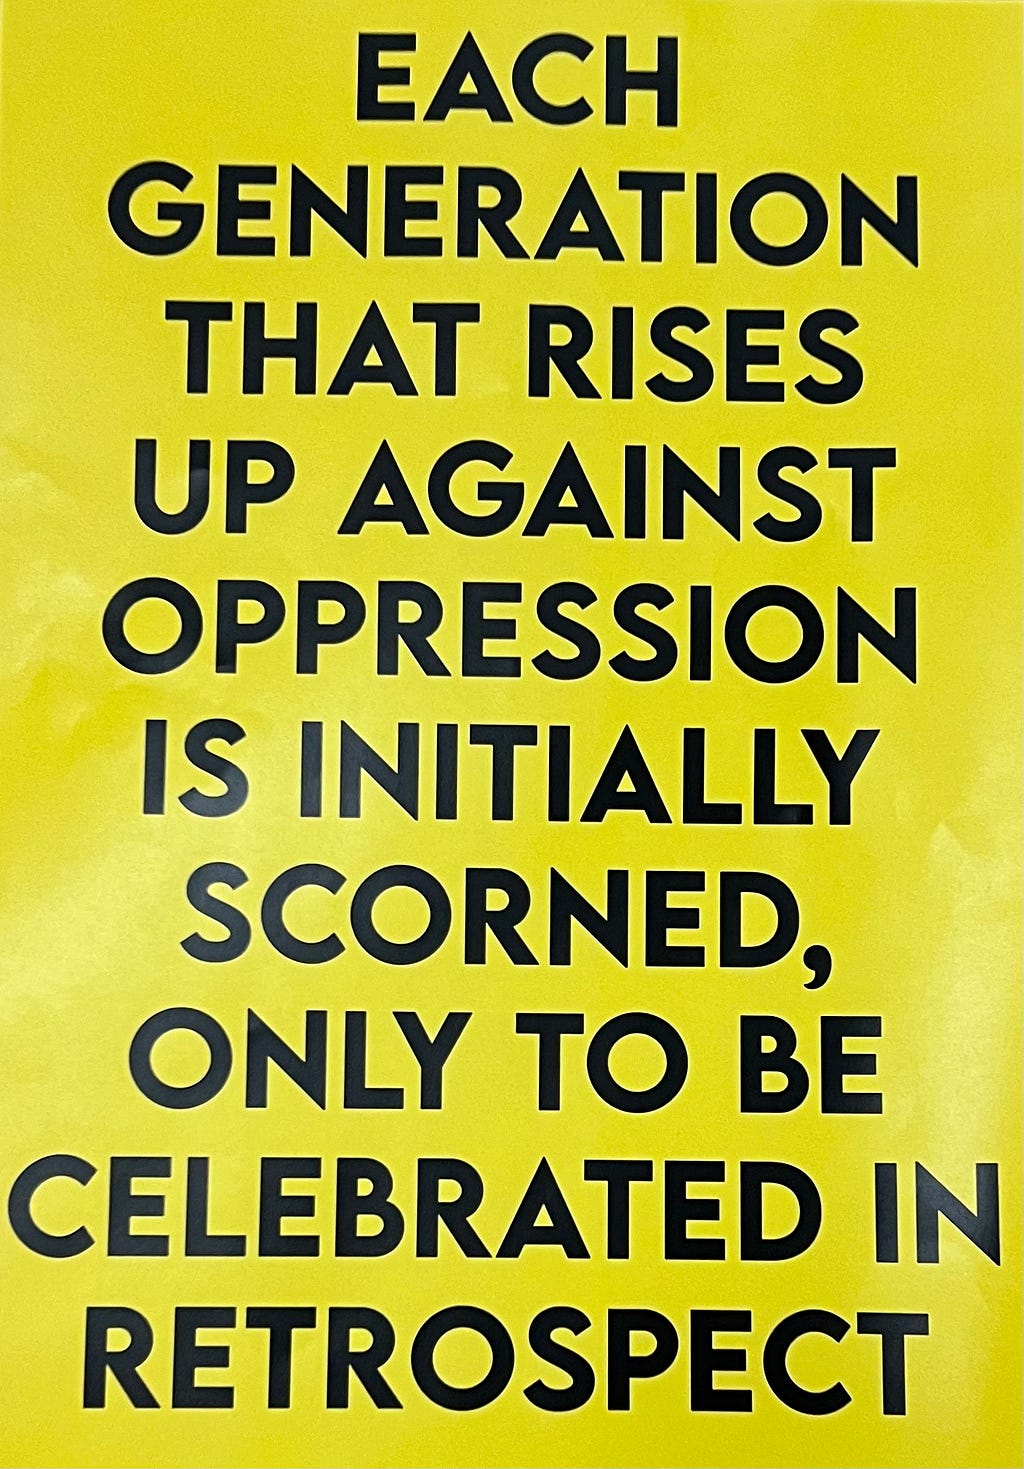 Picture of yellow poster with black text that reads: each genderation that rises up against oppression is initially scorned, only to be celebrated in retrospect.